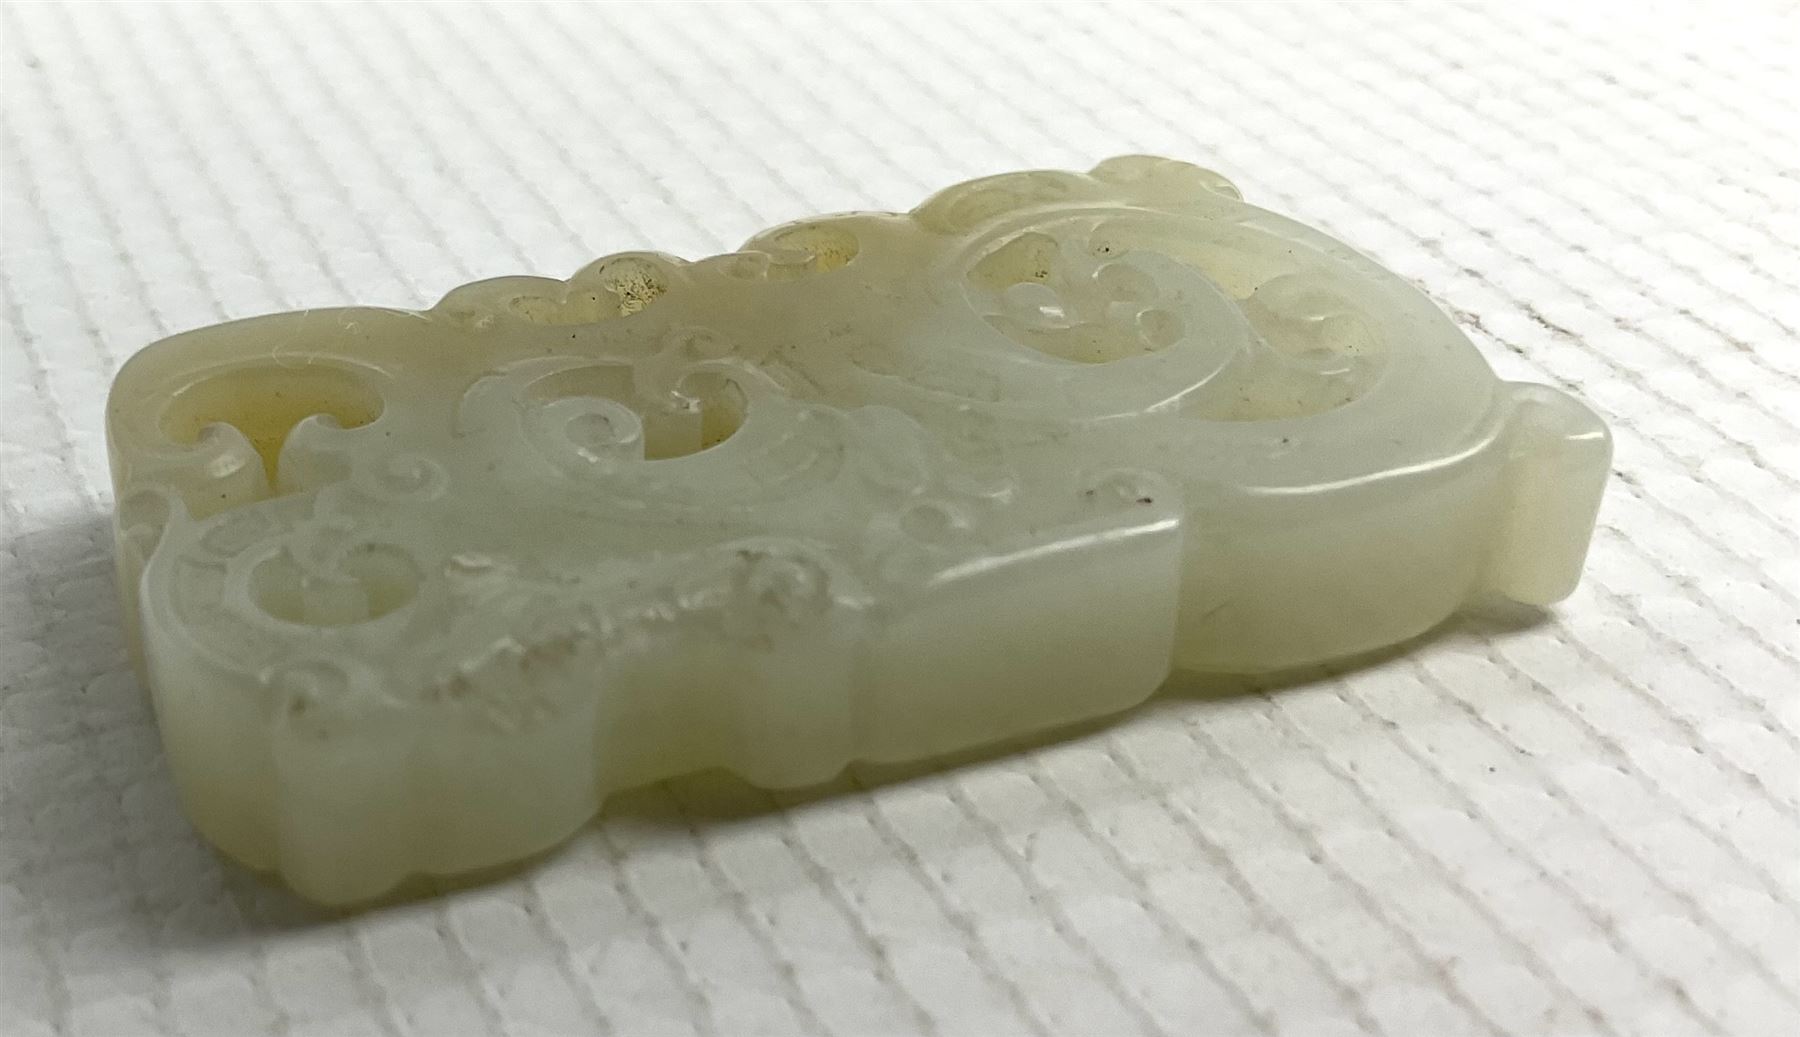 Chinese jade rectangular plaque with carved and pierced decoration 4.5cm x 2.5cm - Image 2 of 3